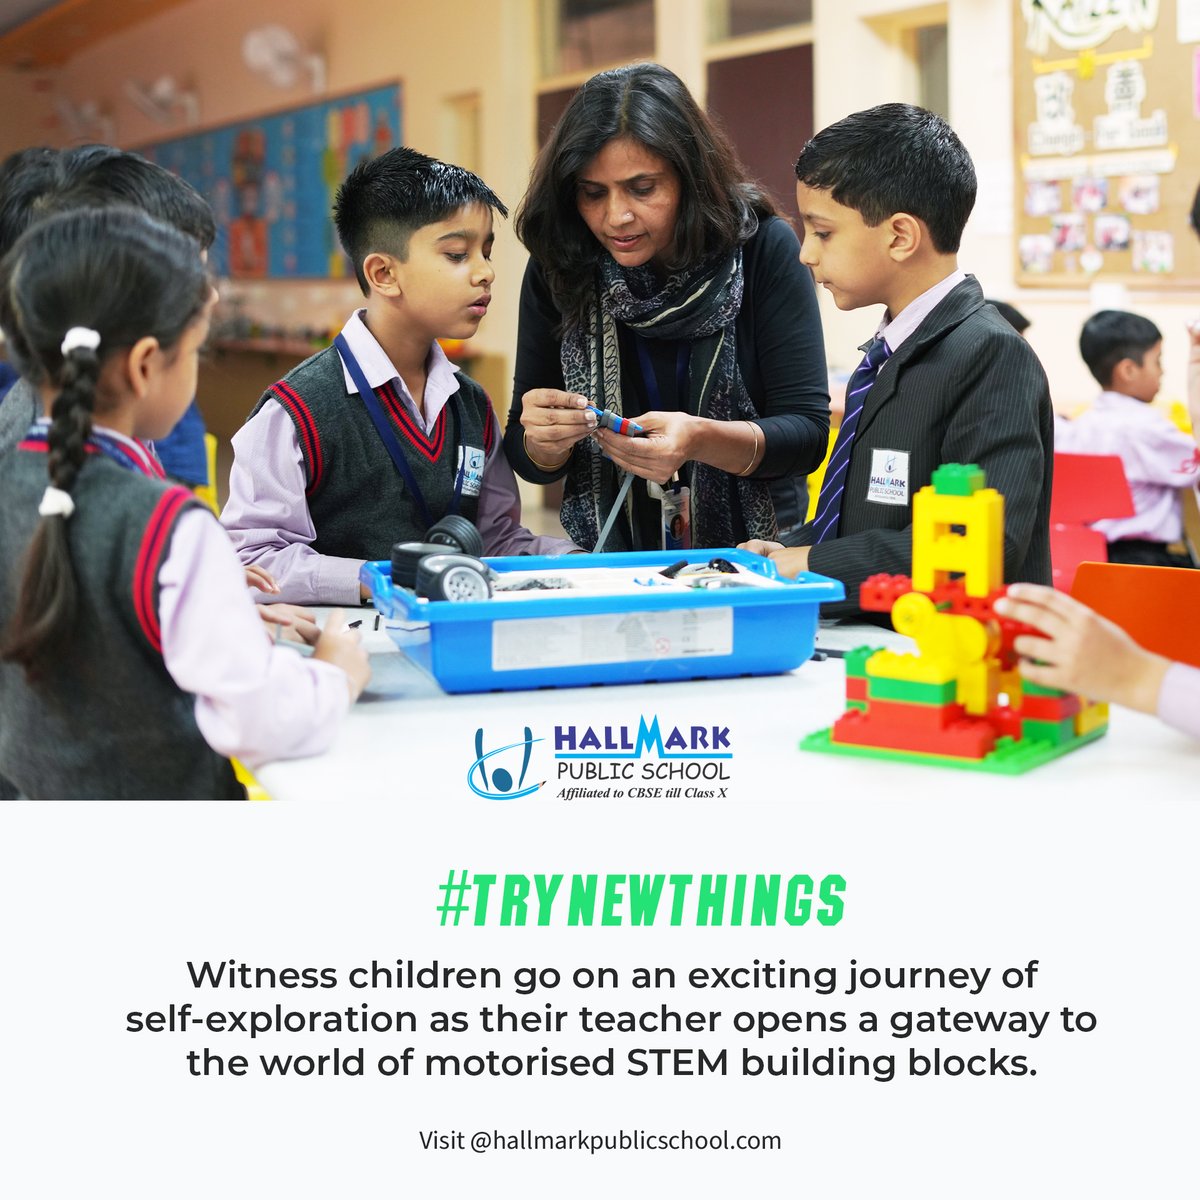 Our unique programme offers a getaway to a world of creativity and innovation, where children can explore the principles of engineering and design in a fun and engaging way 🚀✨

#TryNewThings #STEMEducation #HallmarkPublicSchool #LifelongLearning #CBSESchoolInPanchkula